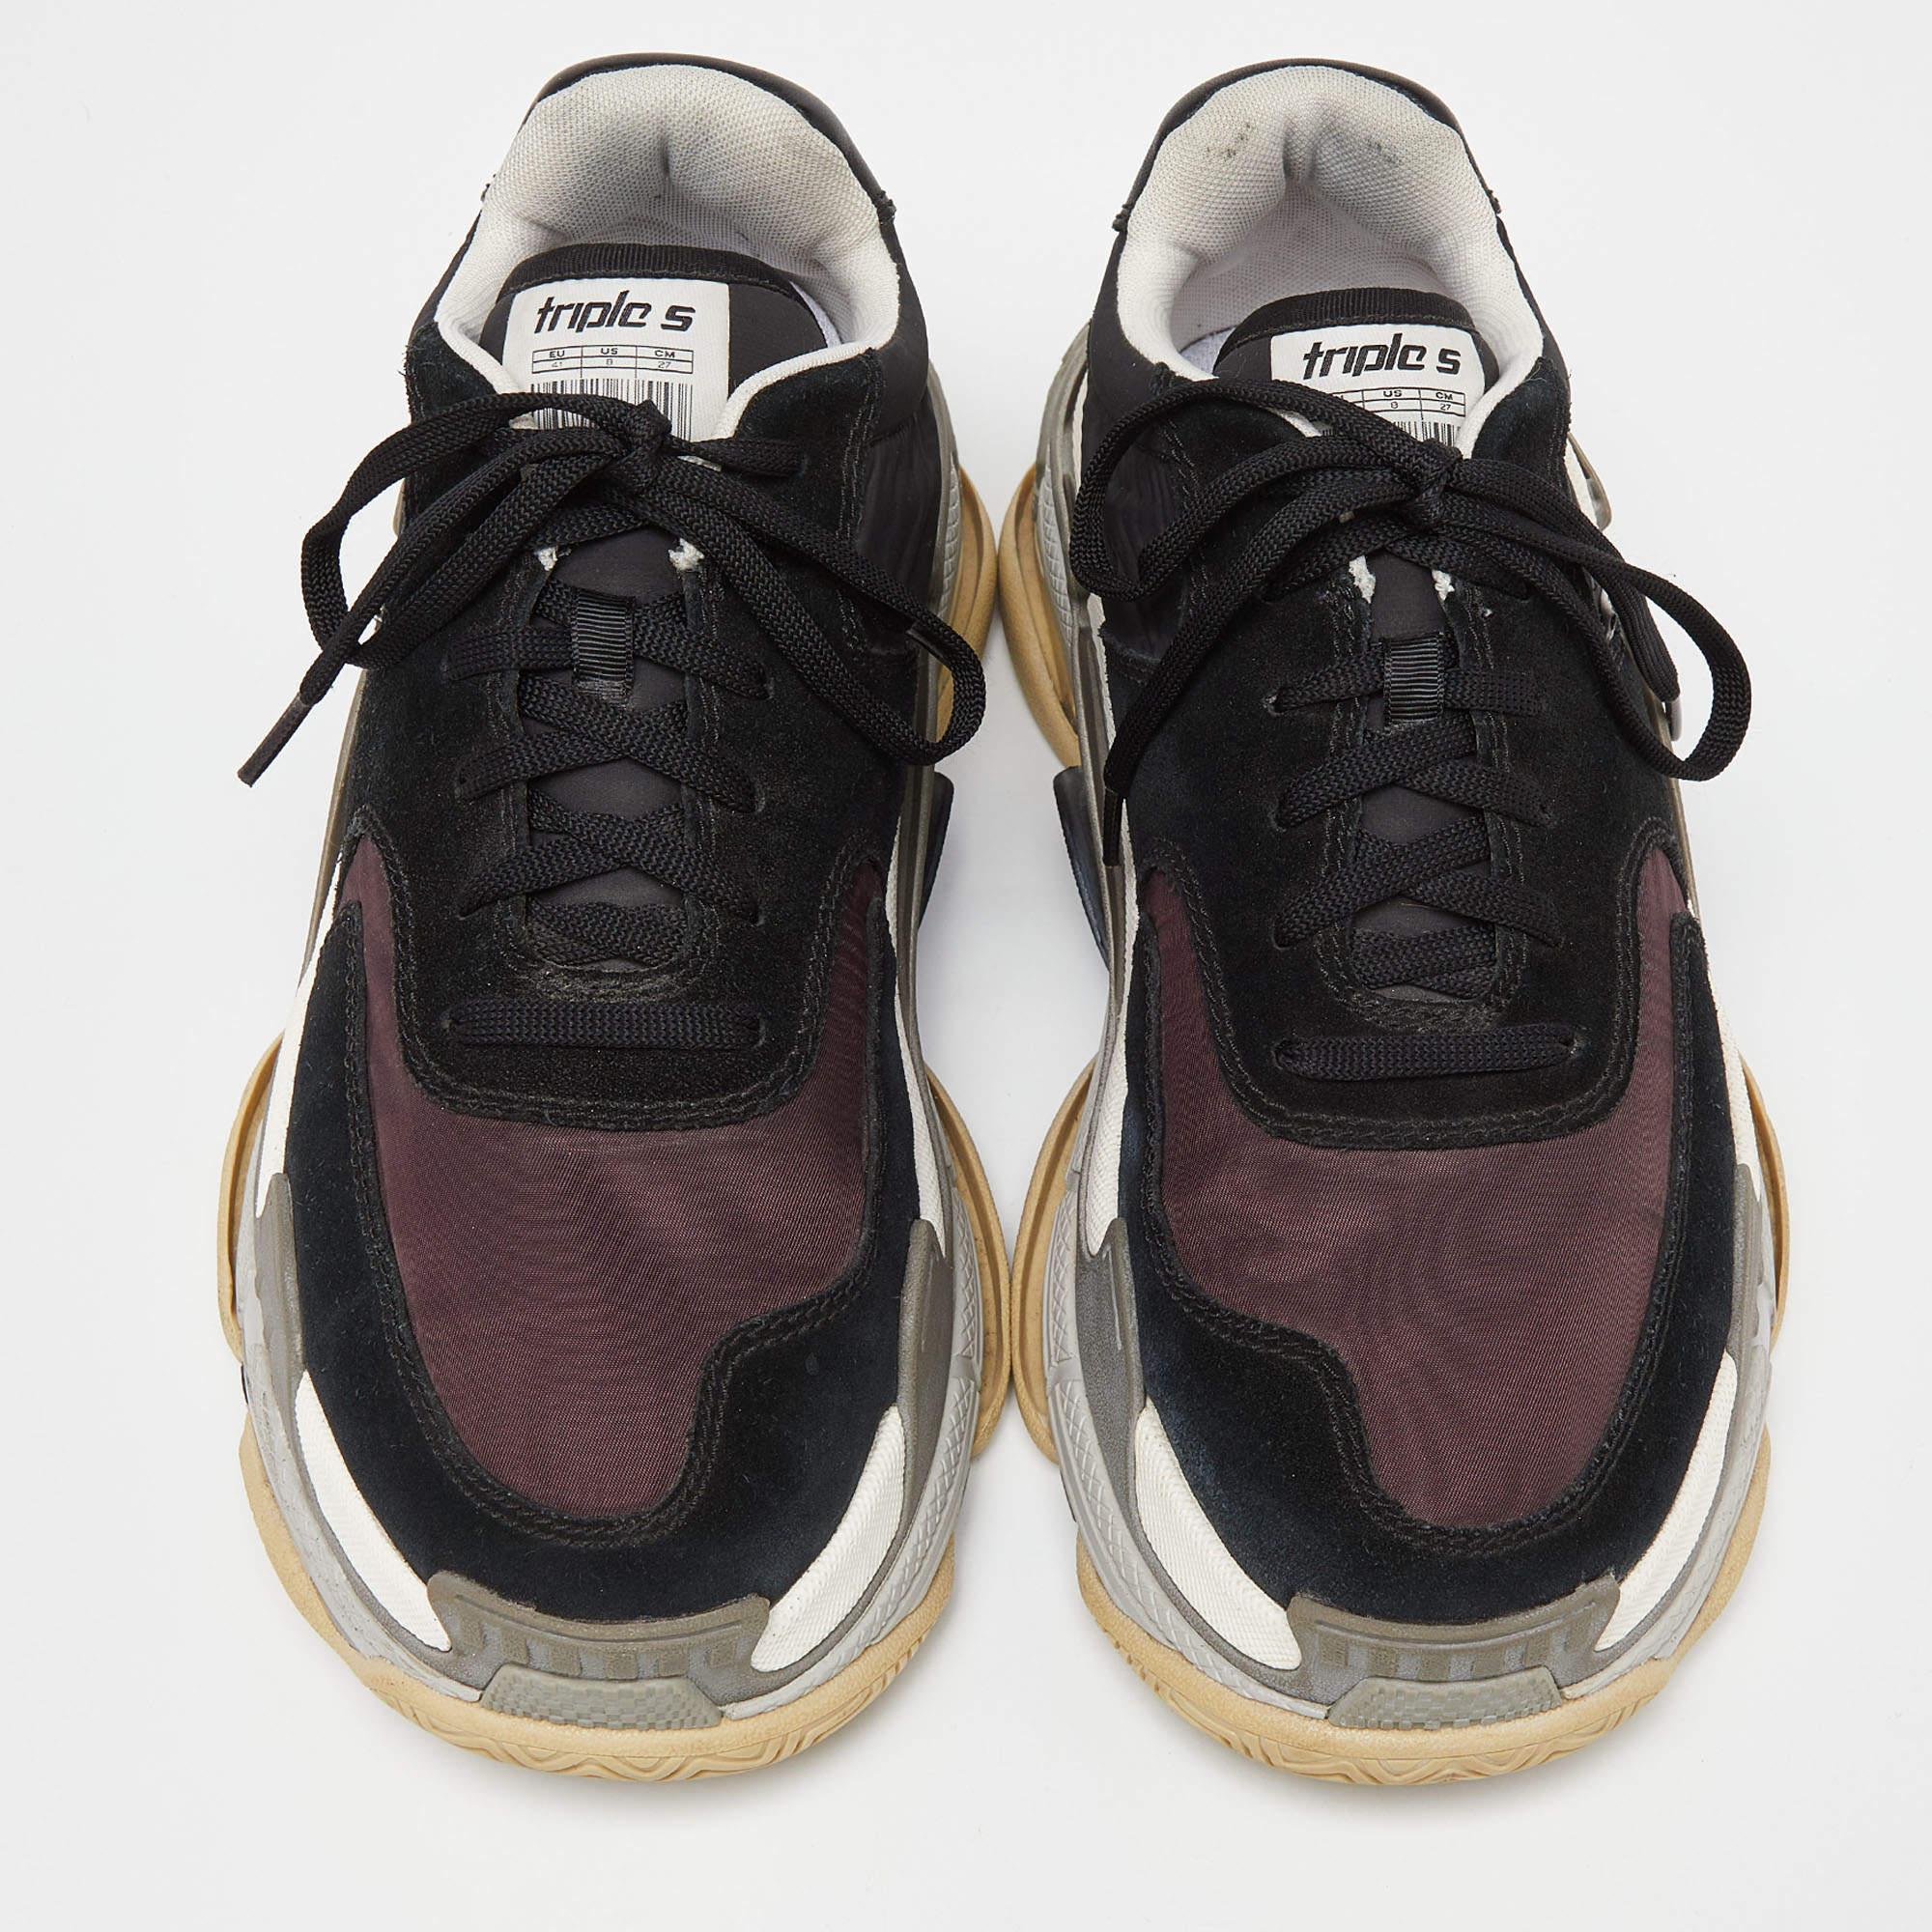 Balenciaga Black/Burgundy Suede and Nylon Triple S Sneakers Size 41 For Sale 1